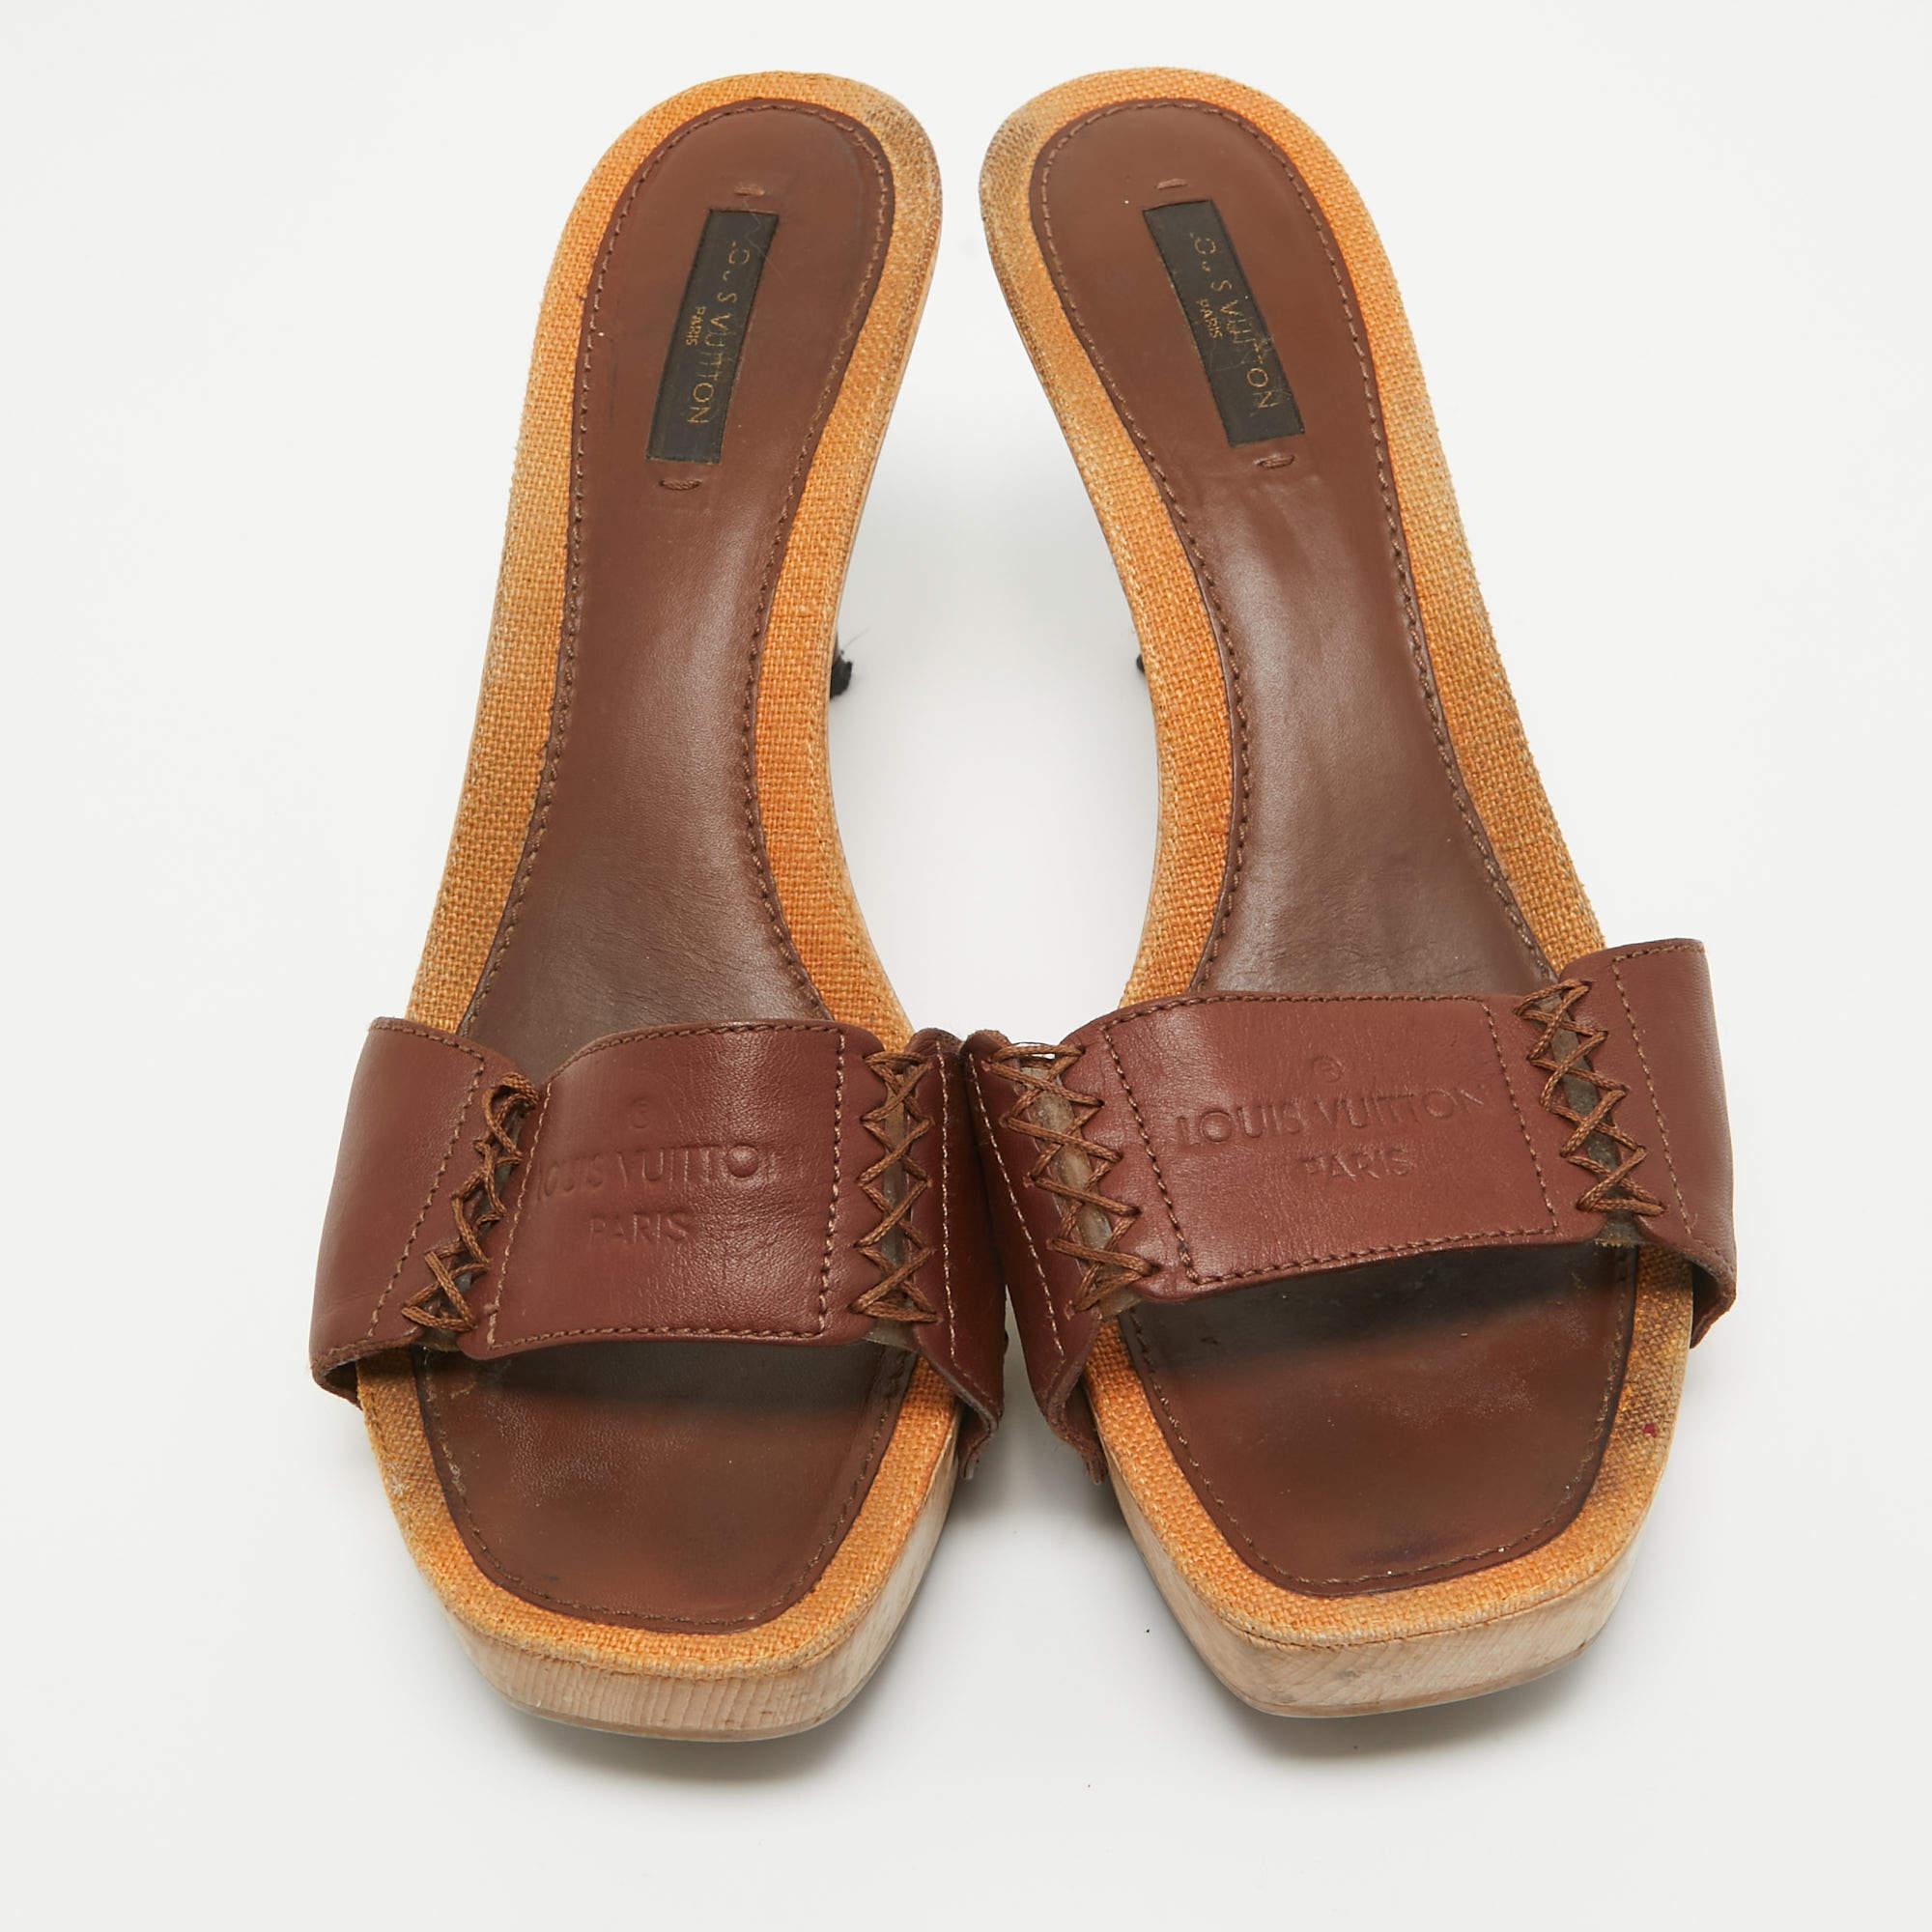 These sandals will frame your feet in an elegant manner. Crafted from quality materials, they display a classy design and comfortable insoles.

